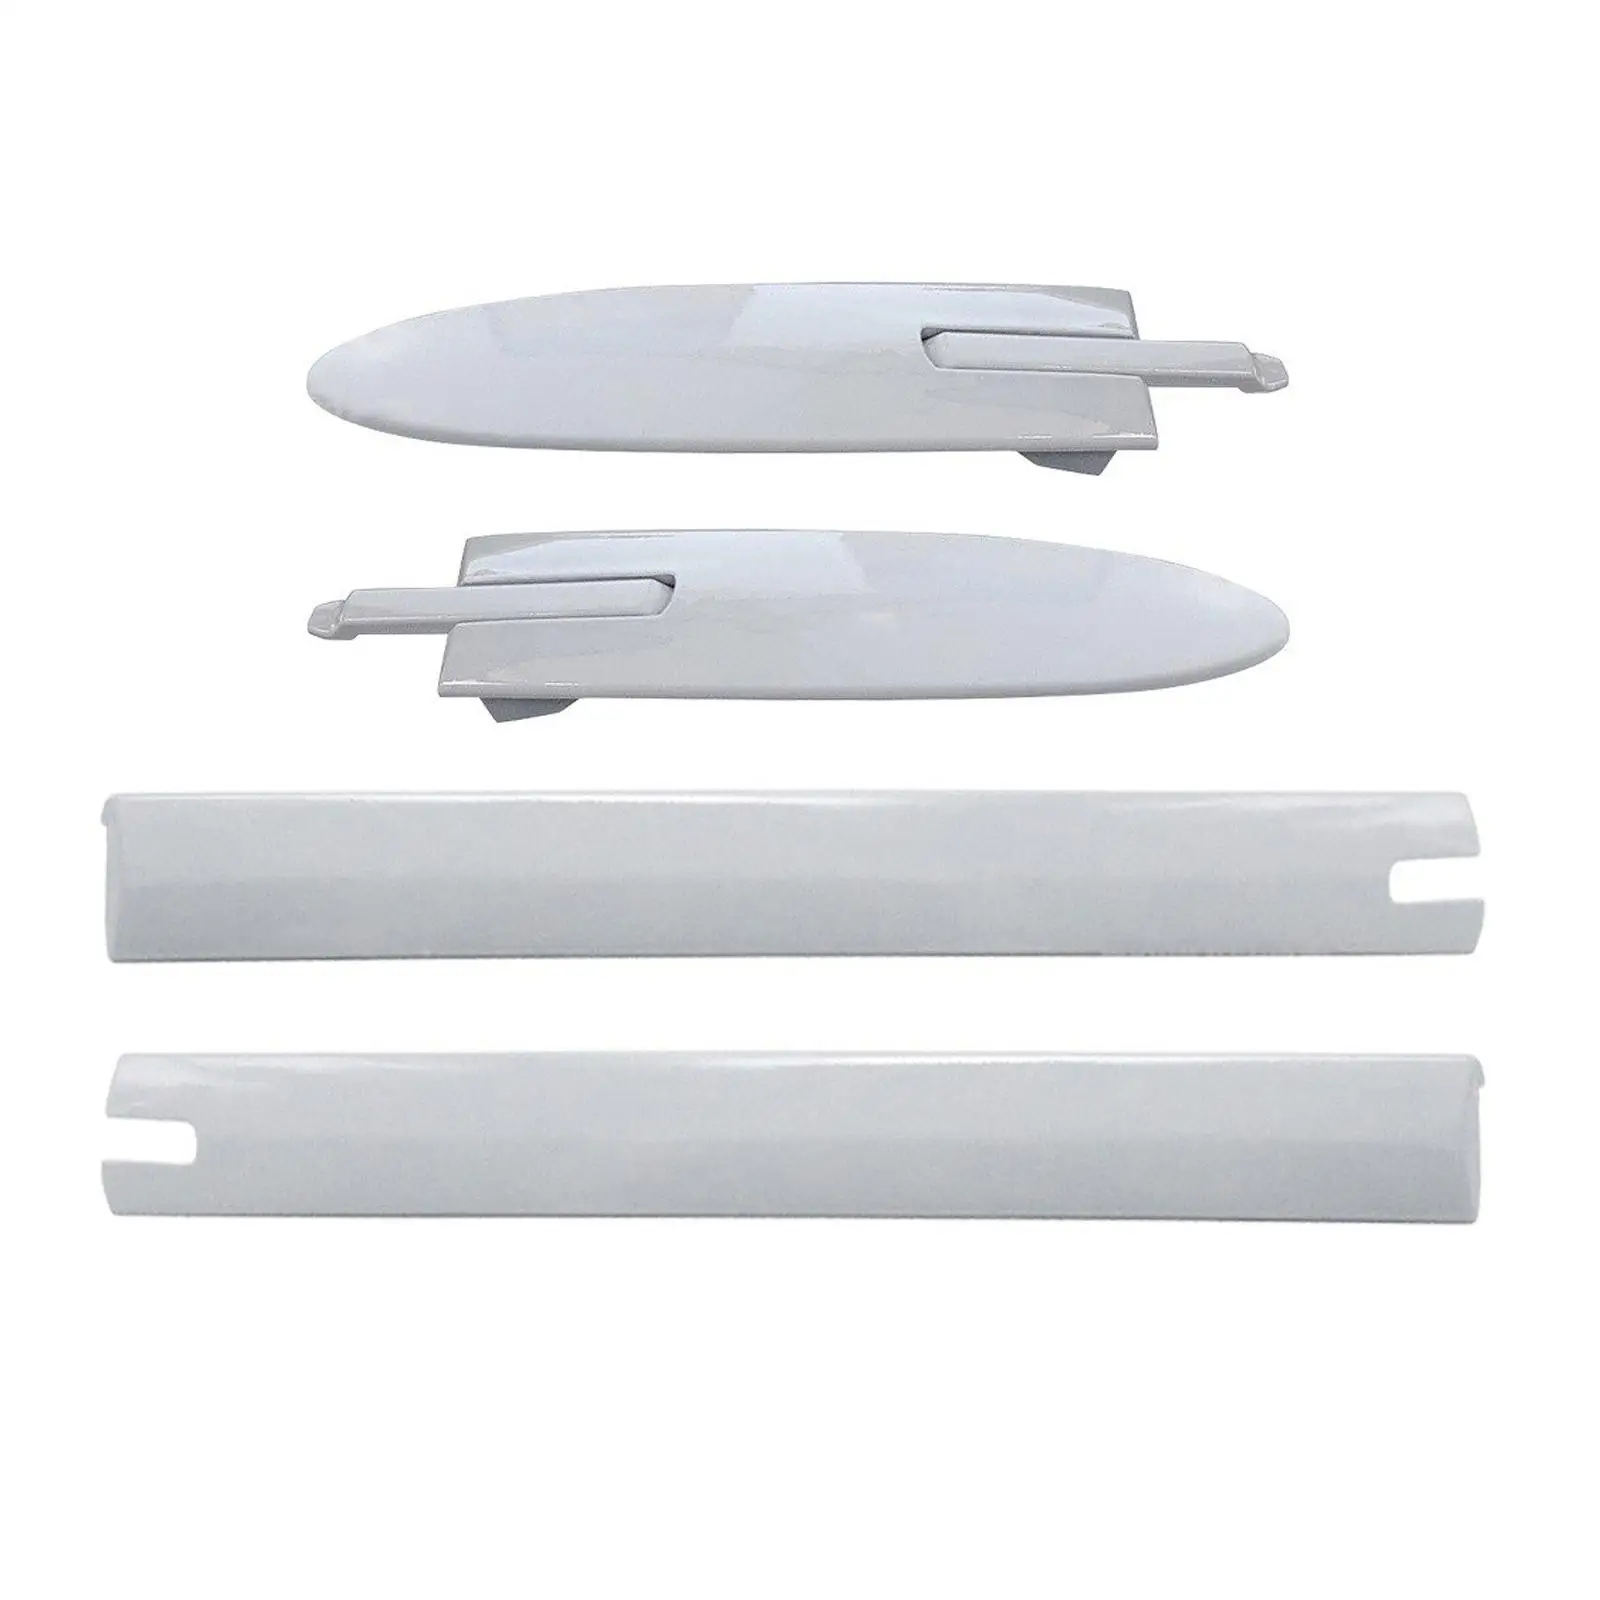 Convertible Roof Top Hinge Cover Durable Directly Replace High Quality for Convertible 430i 335i